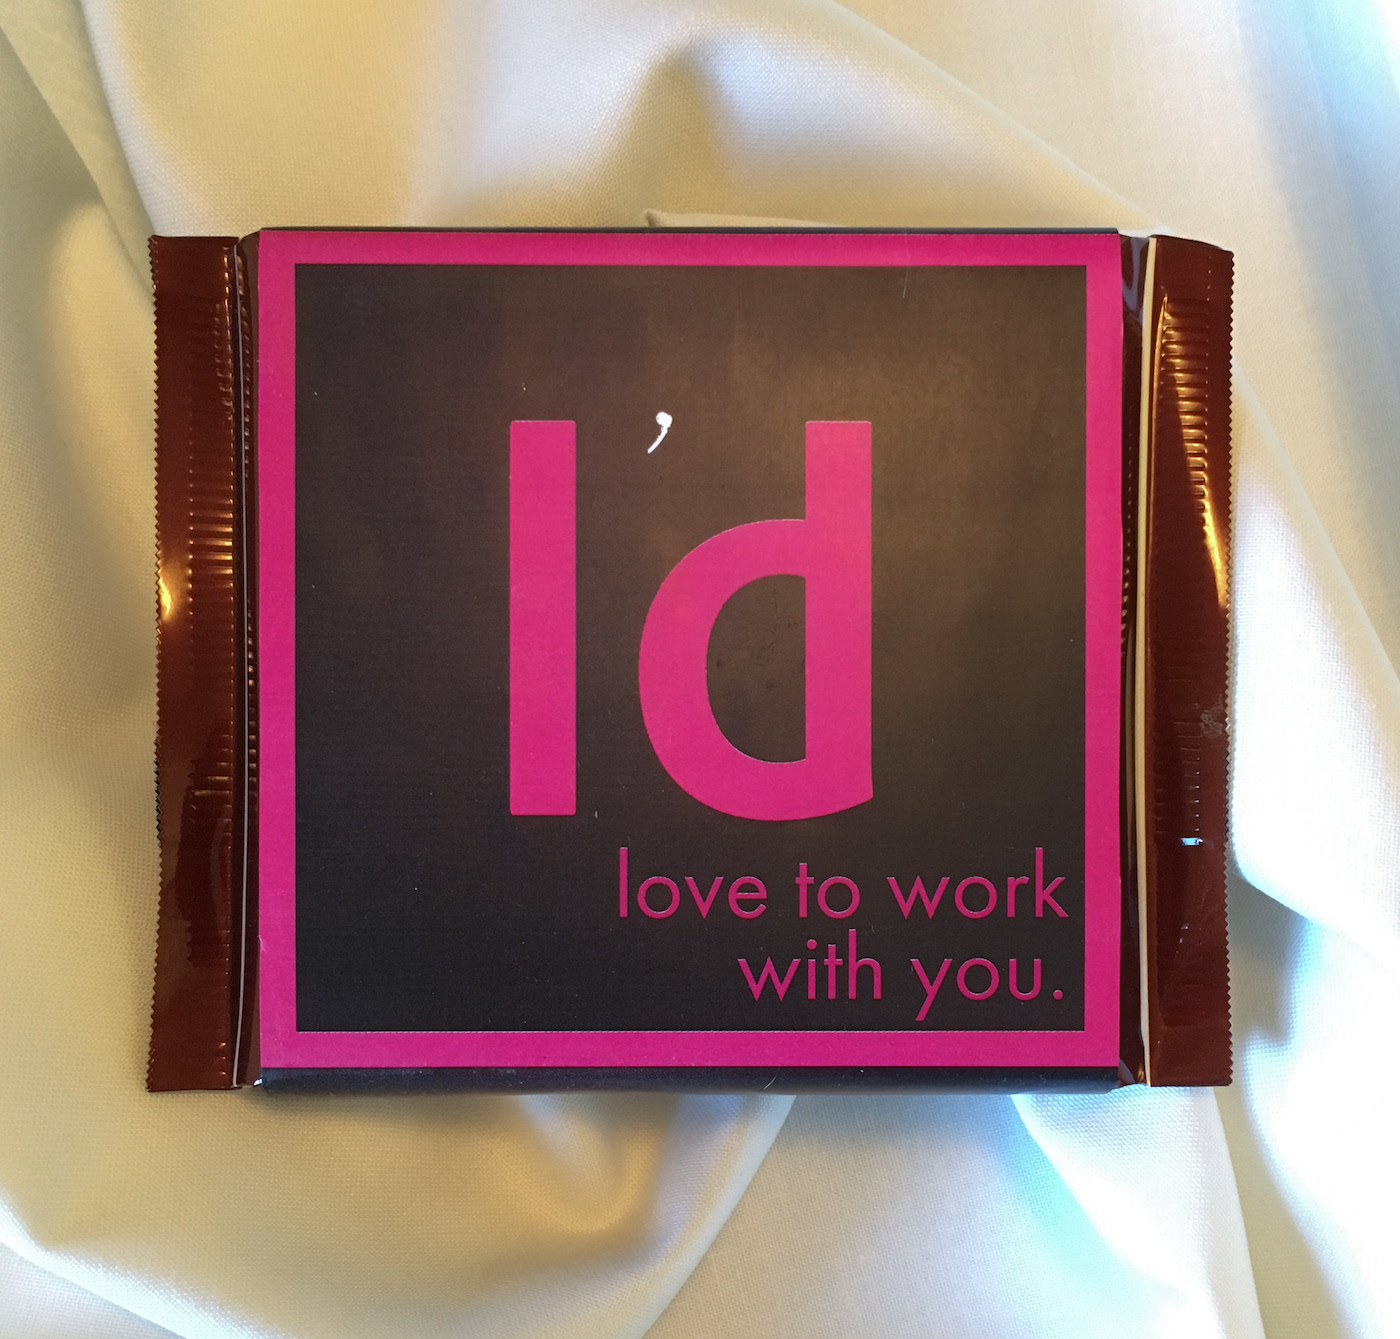 Adobe Suite Chocolate Bars - InDesign (Front)